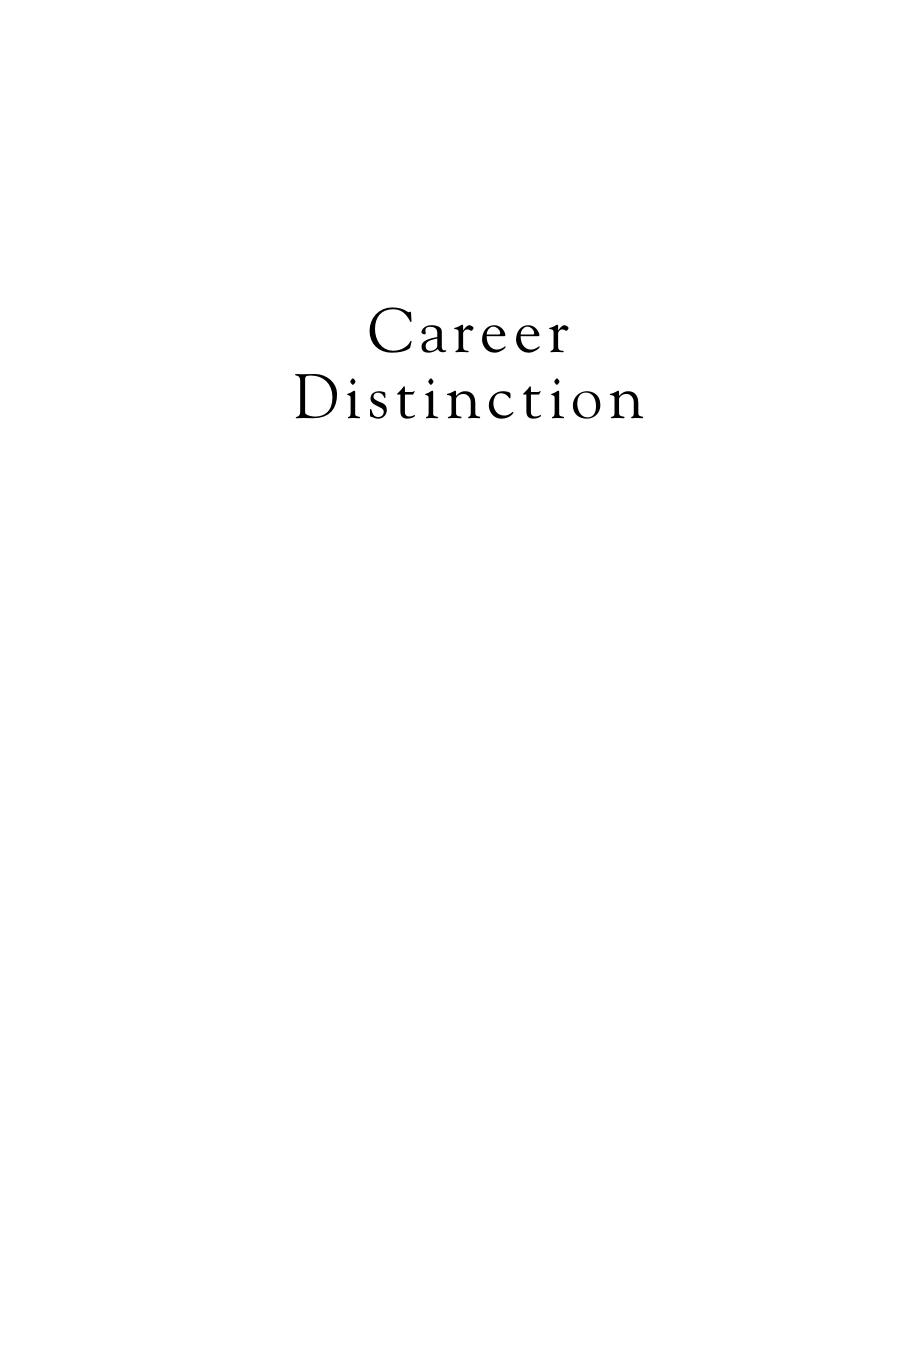 Arruda W., Dixton K. Career Distinction. Stand out by building your brand 2007